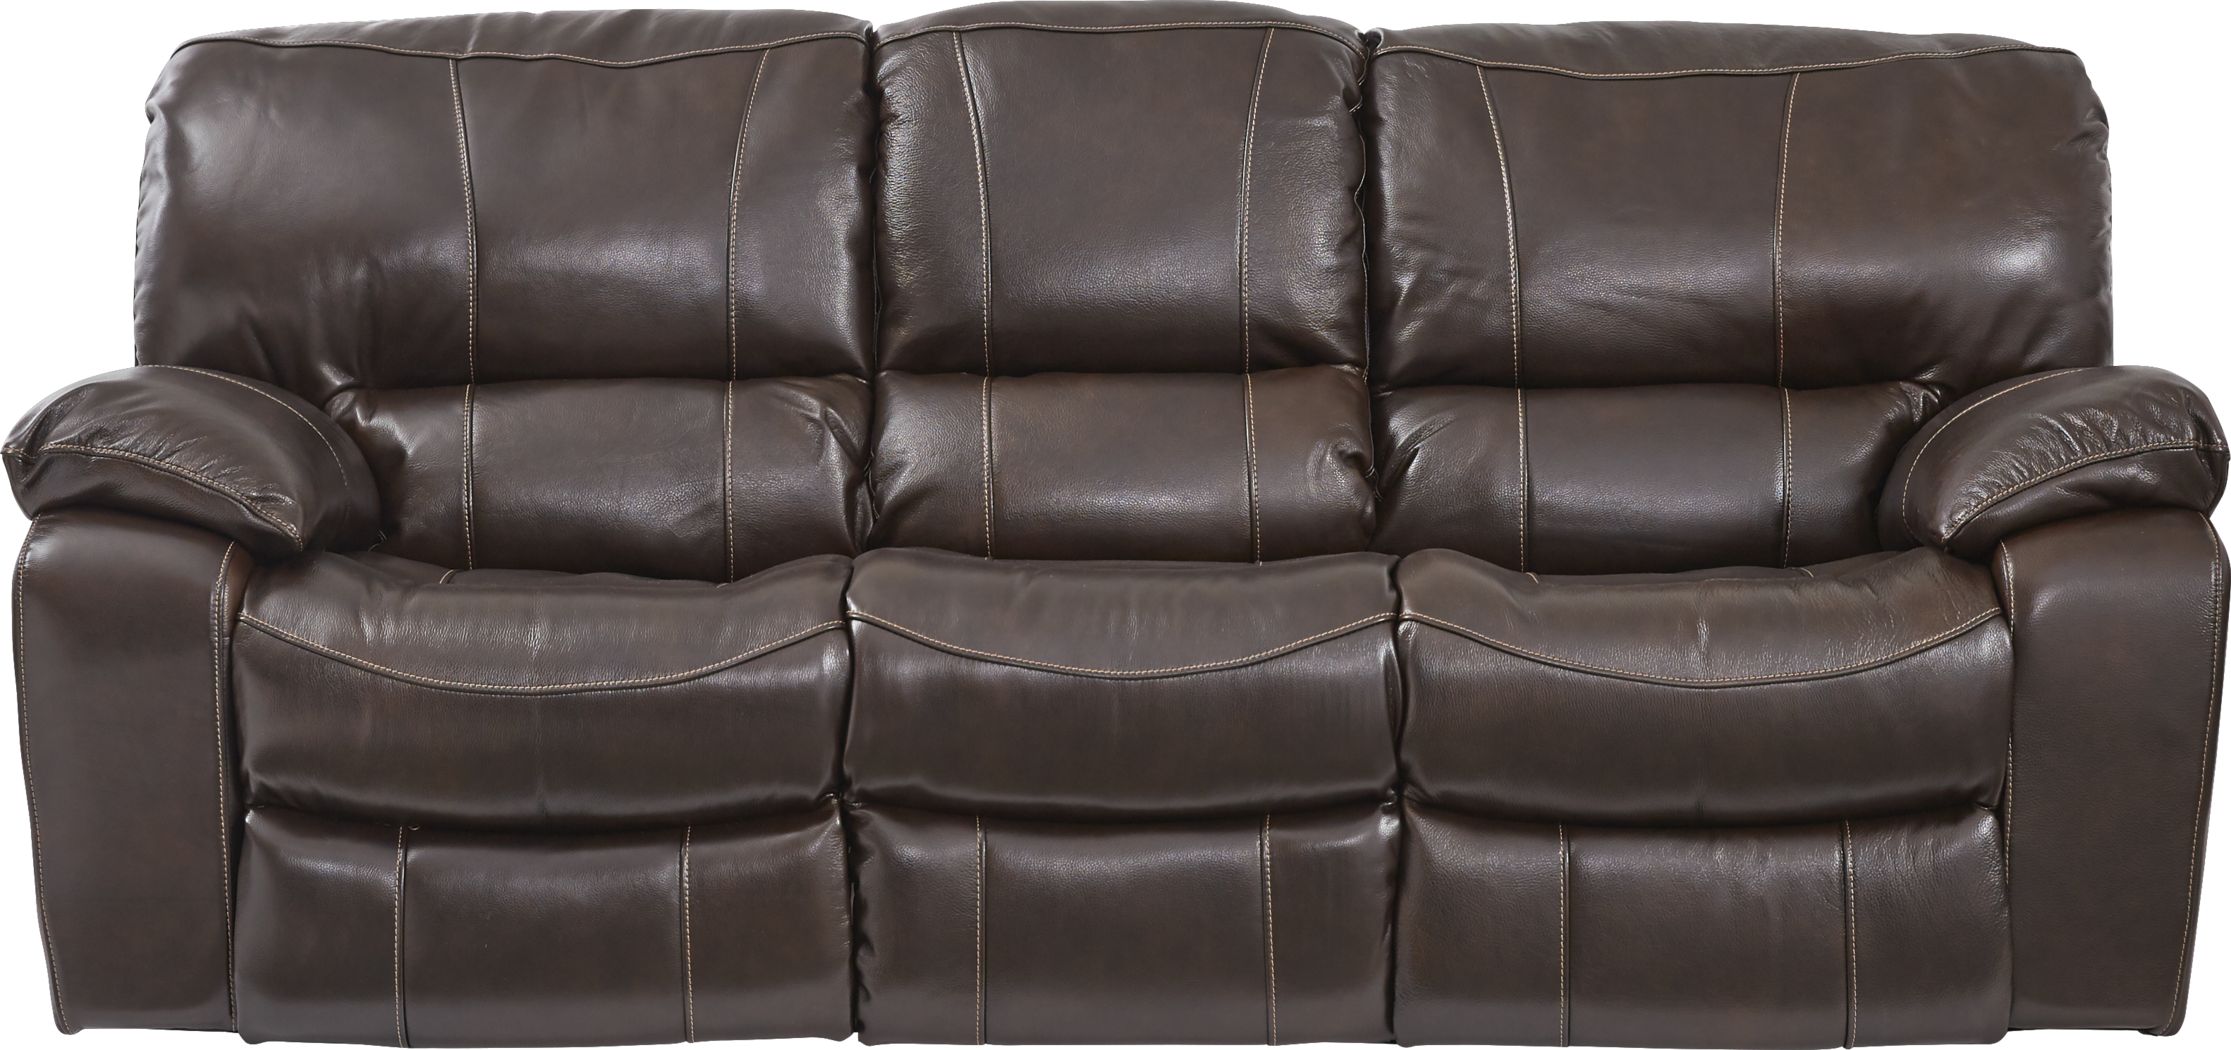 sanderson leather reclining sofa reviews